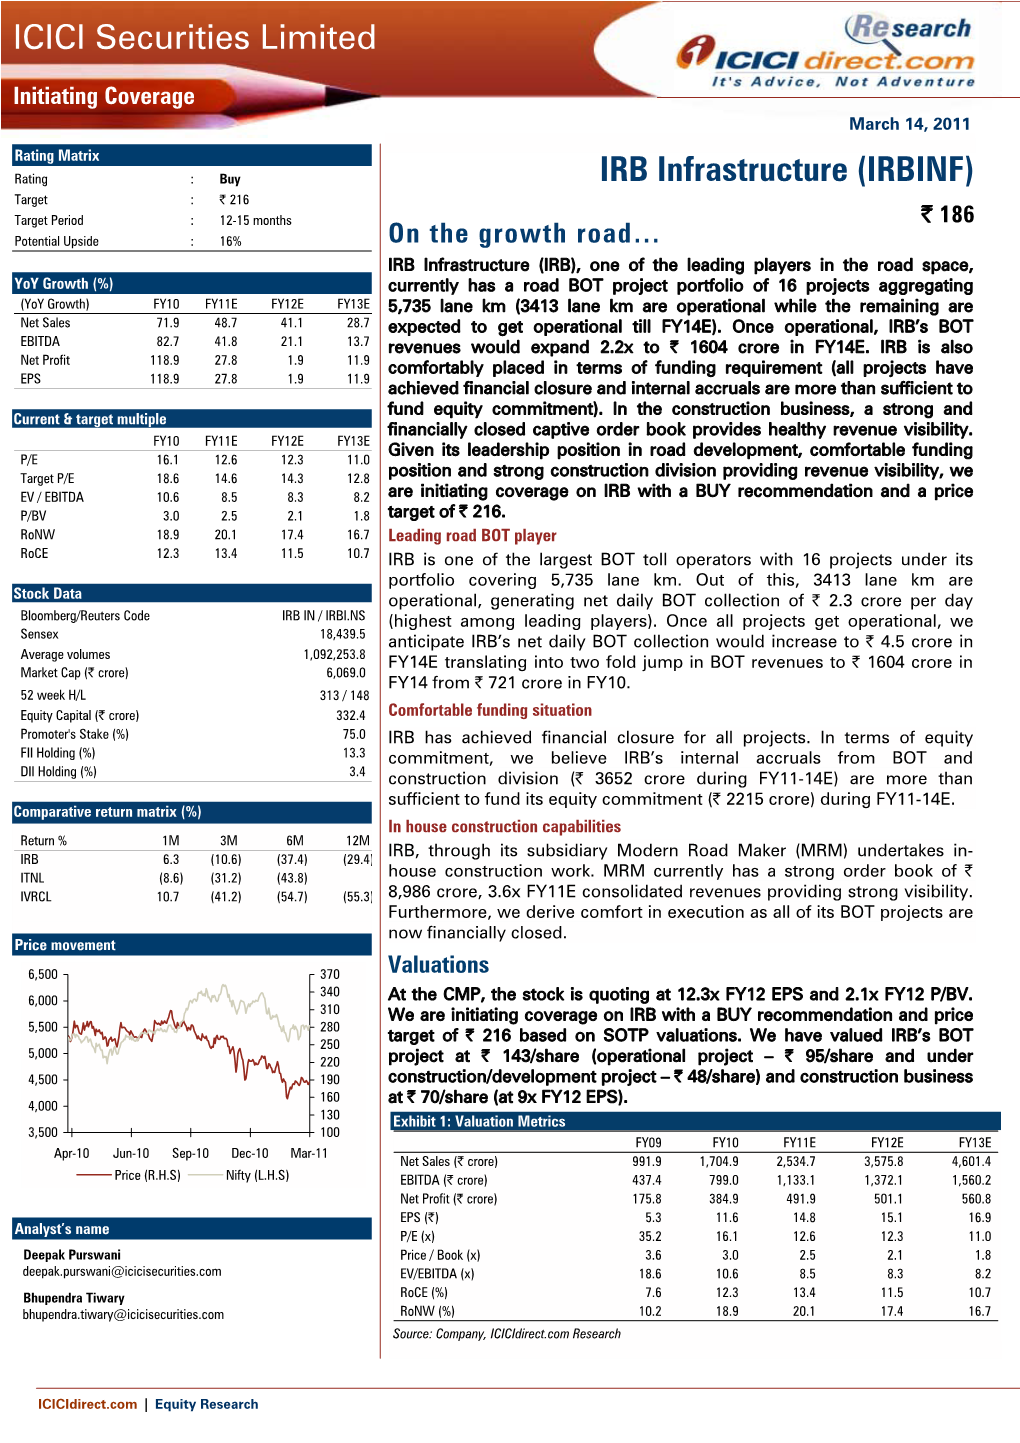 ICICI Securities Limited IRB Infrastructure (IRBINF)